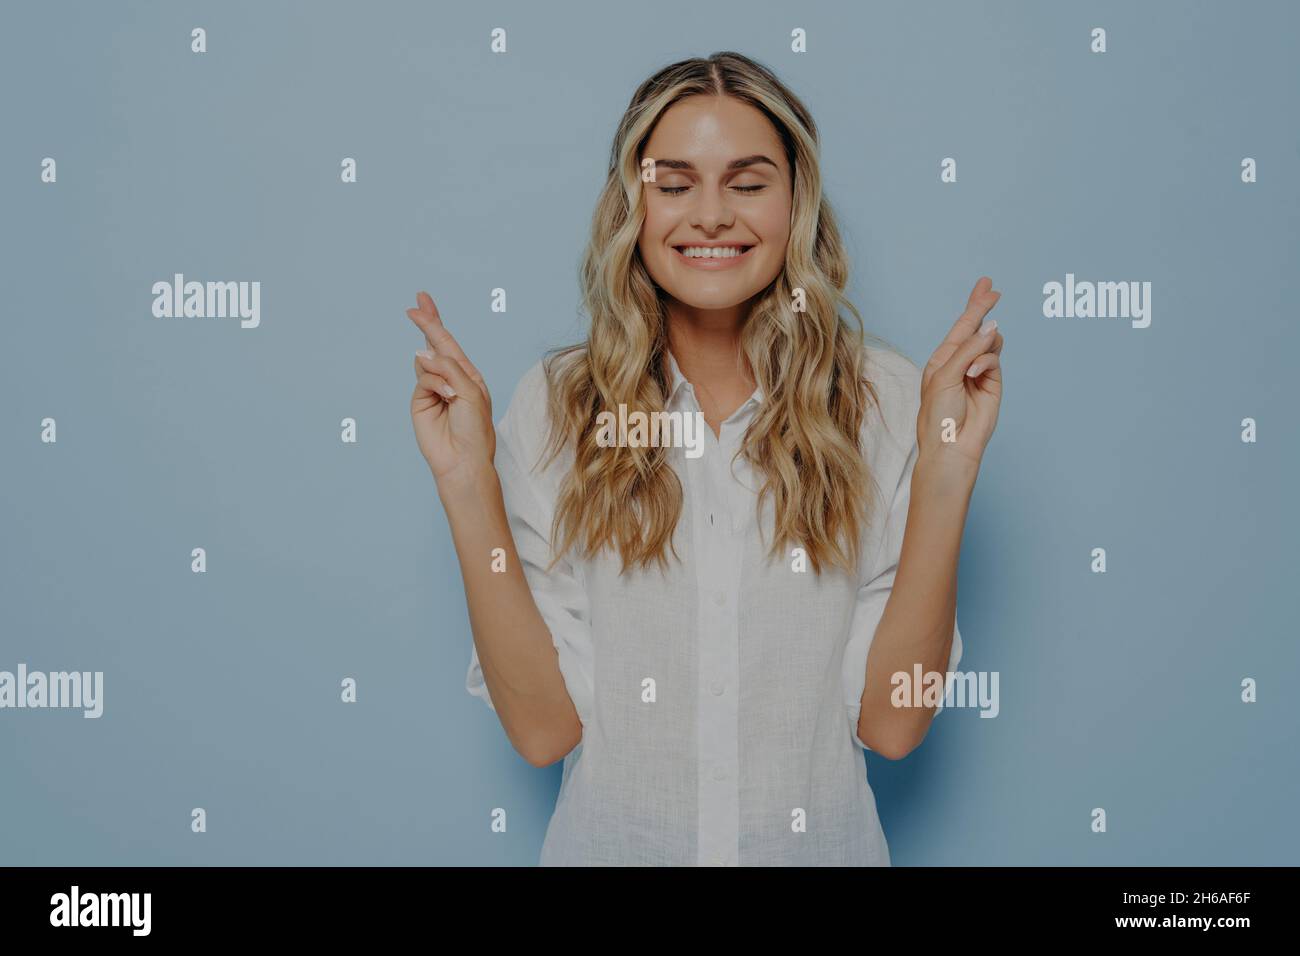 Blonde woman with closed eyes making wish Stock Photo